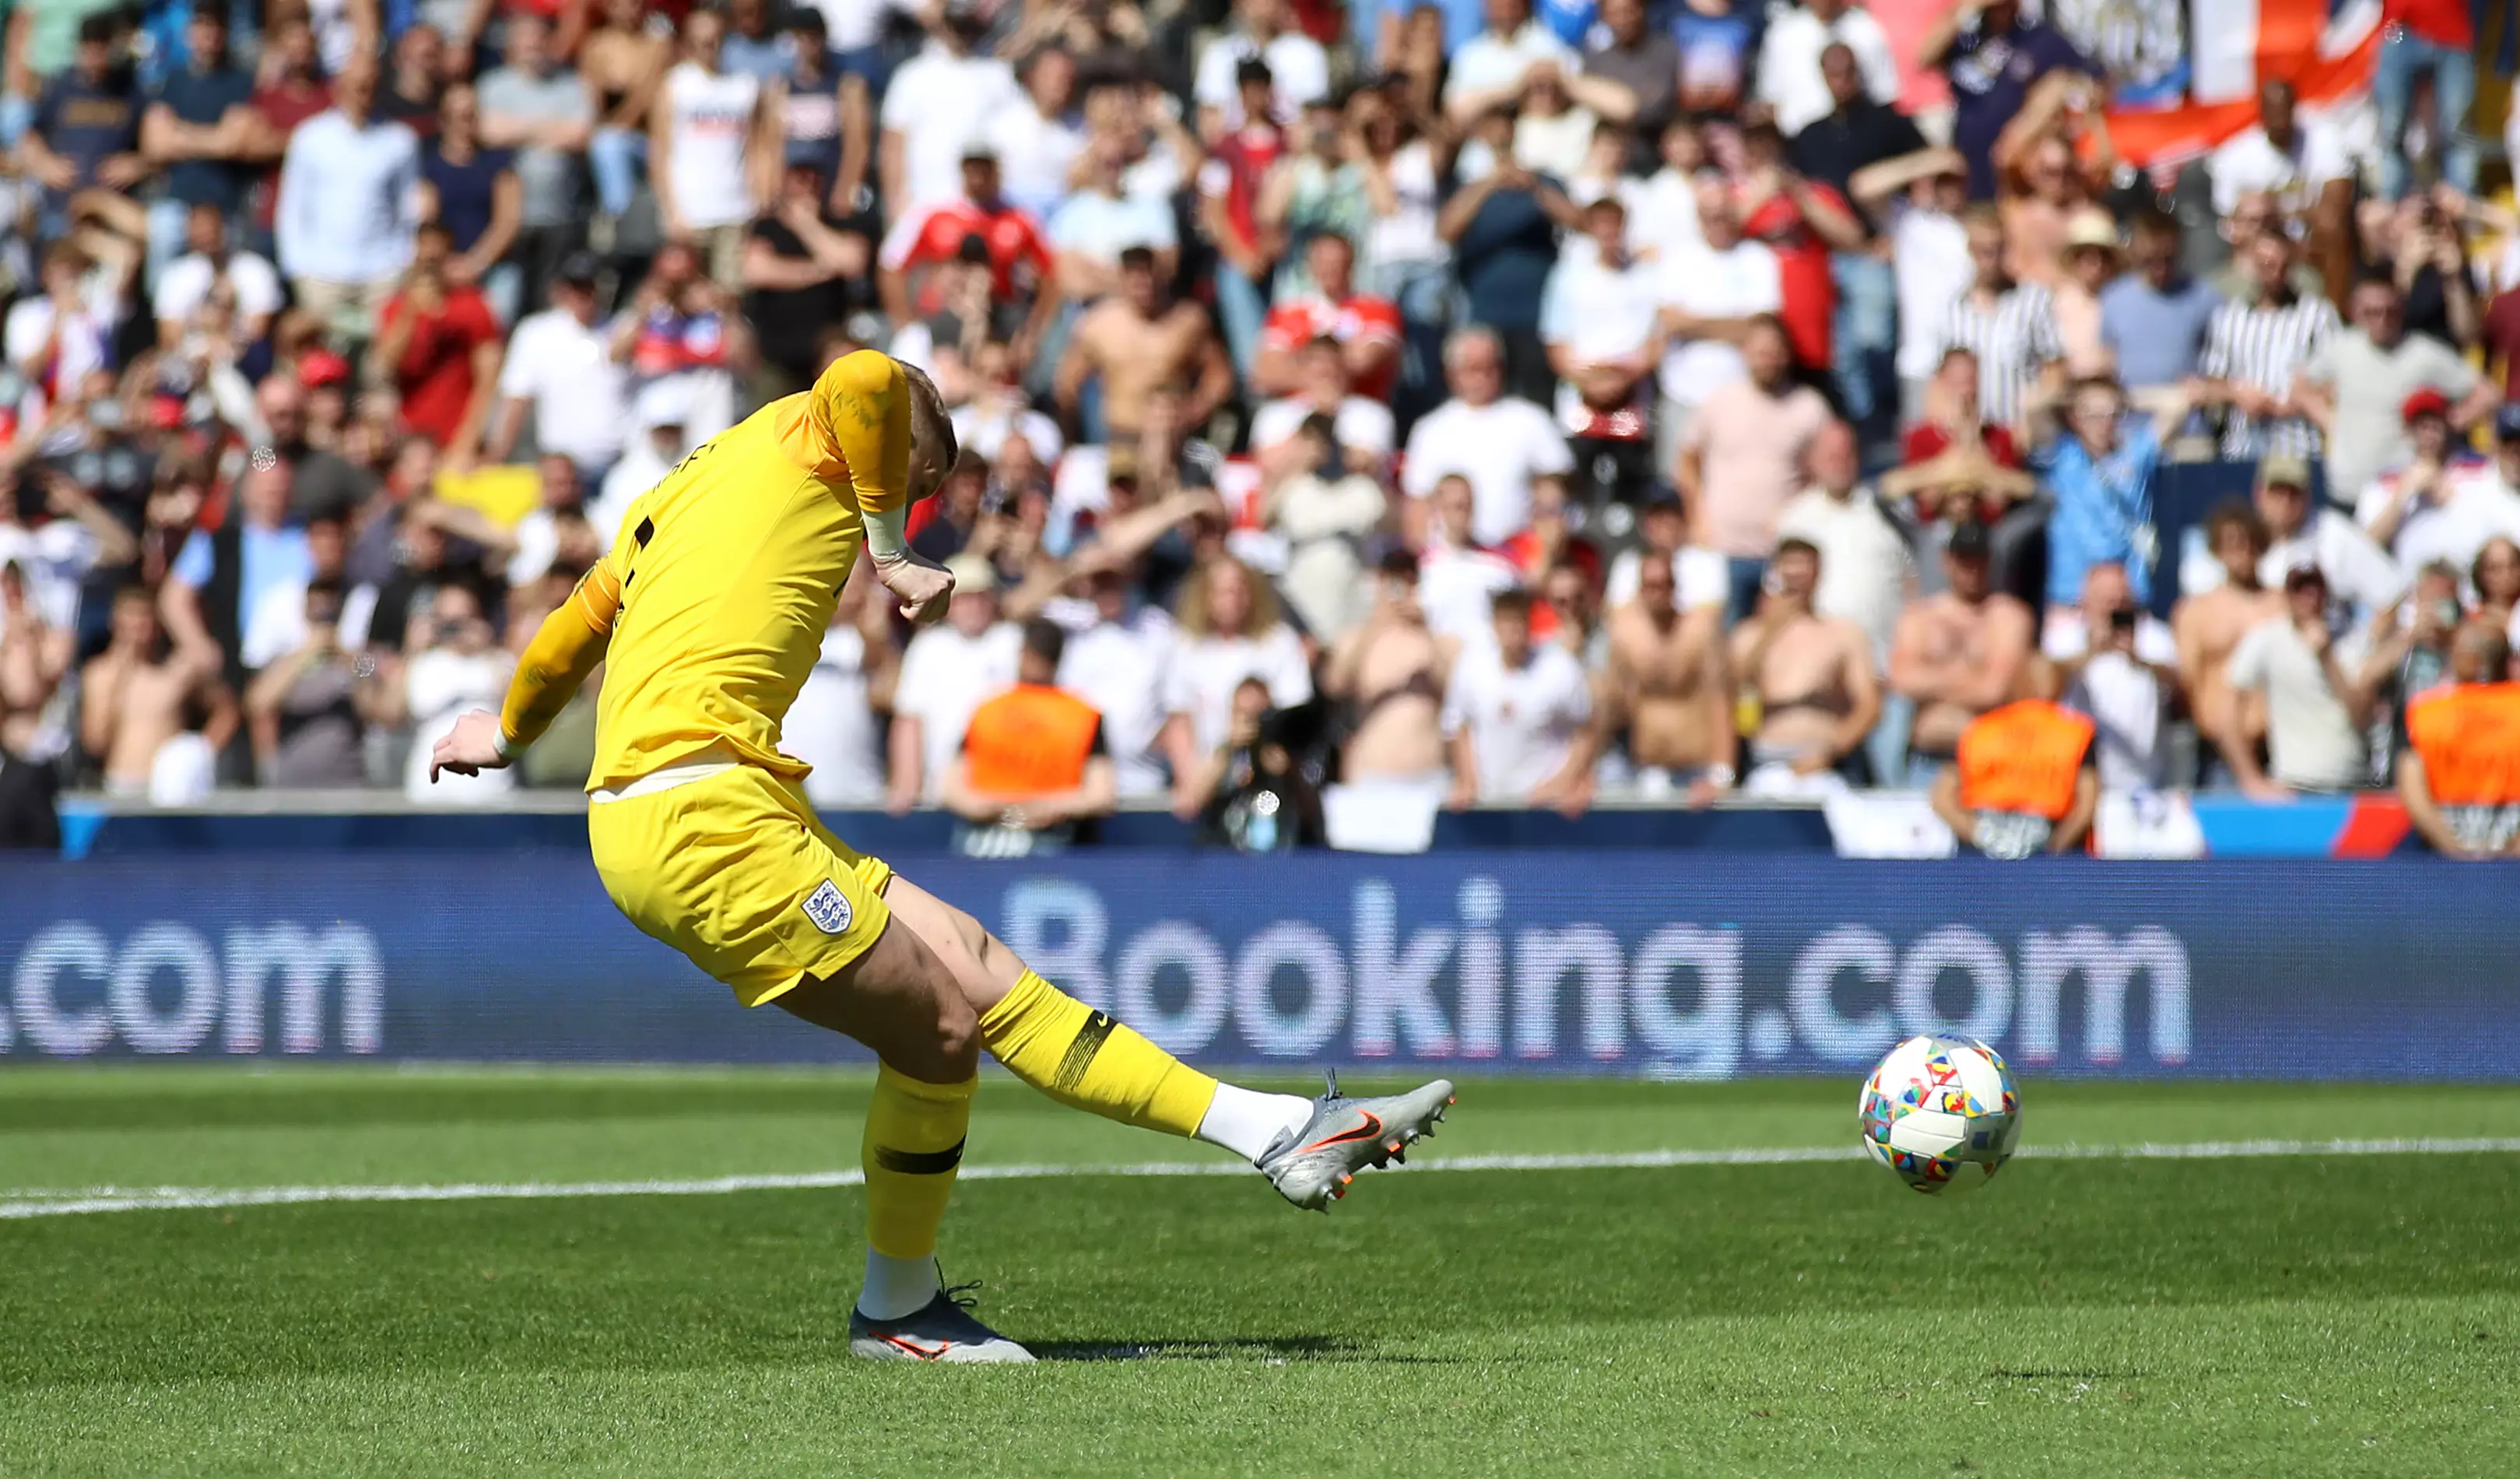 Even Pickford got in on the act against Switzerland. Image: PA Images